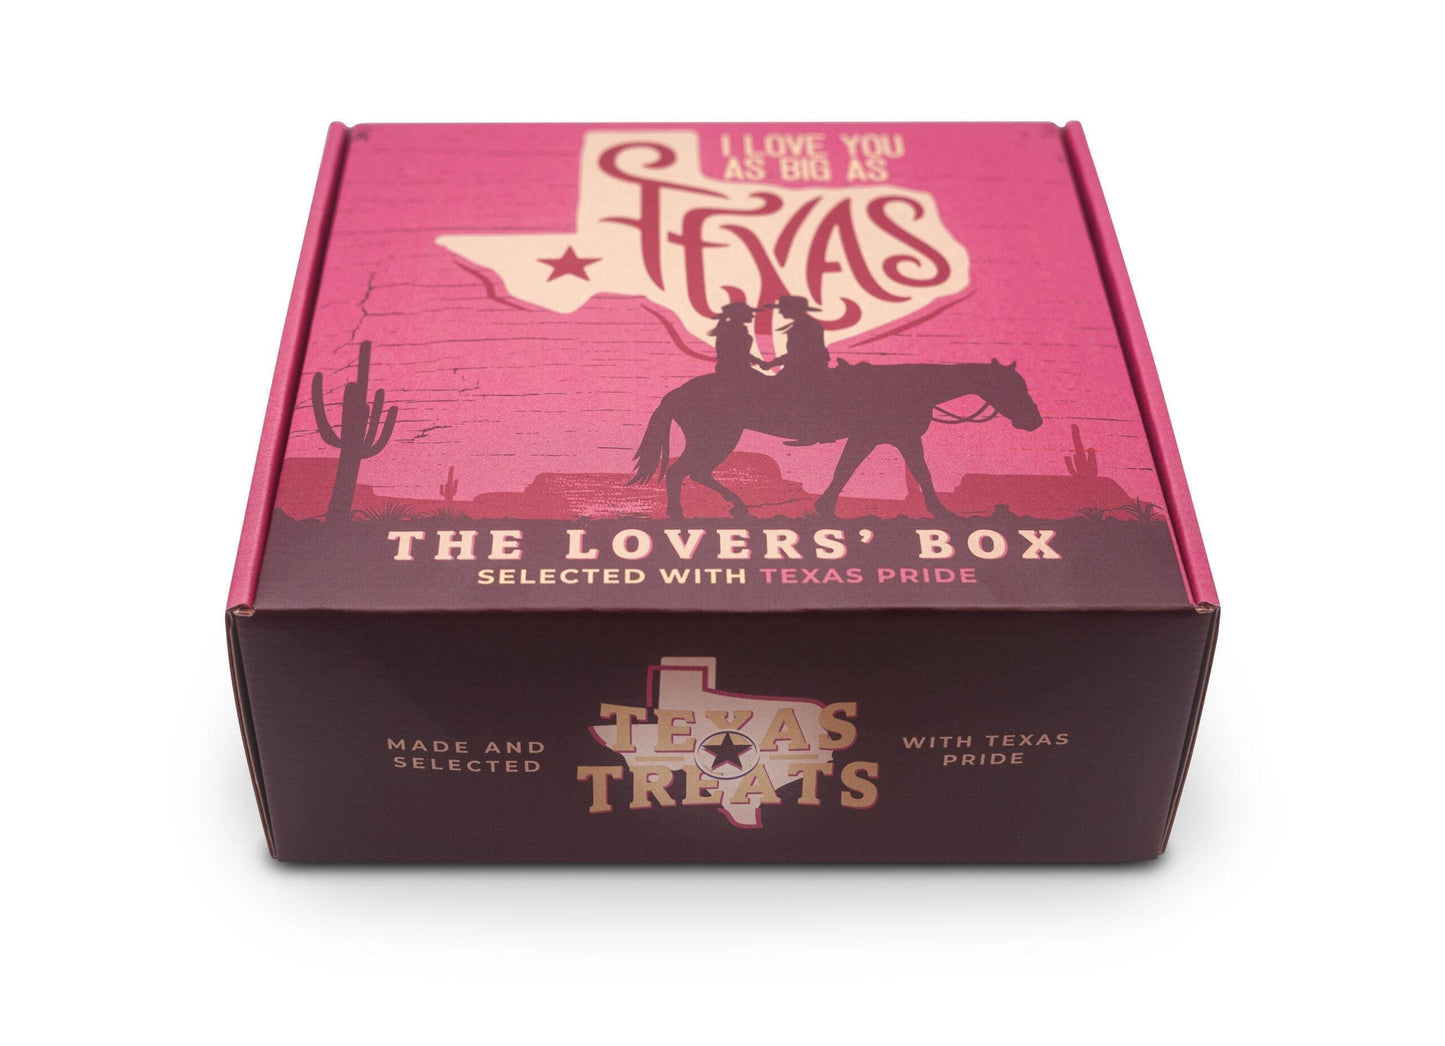 Texas Treats' Lovers box – available for personal and corporate gifting.